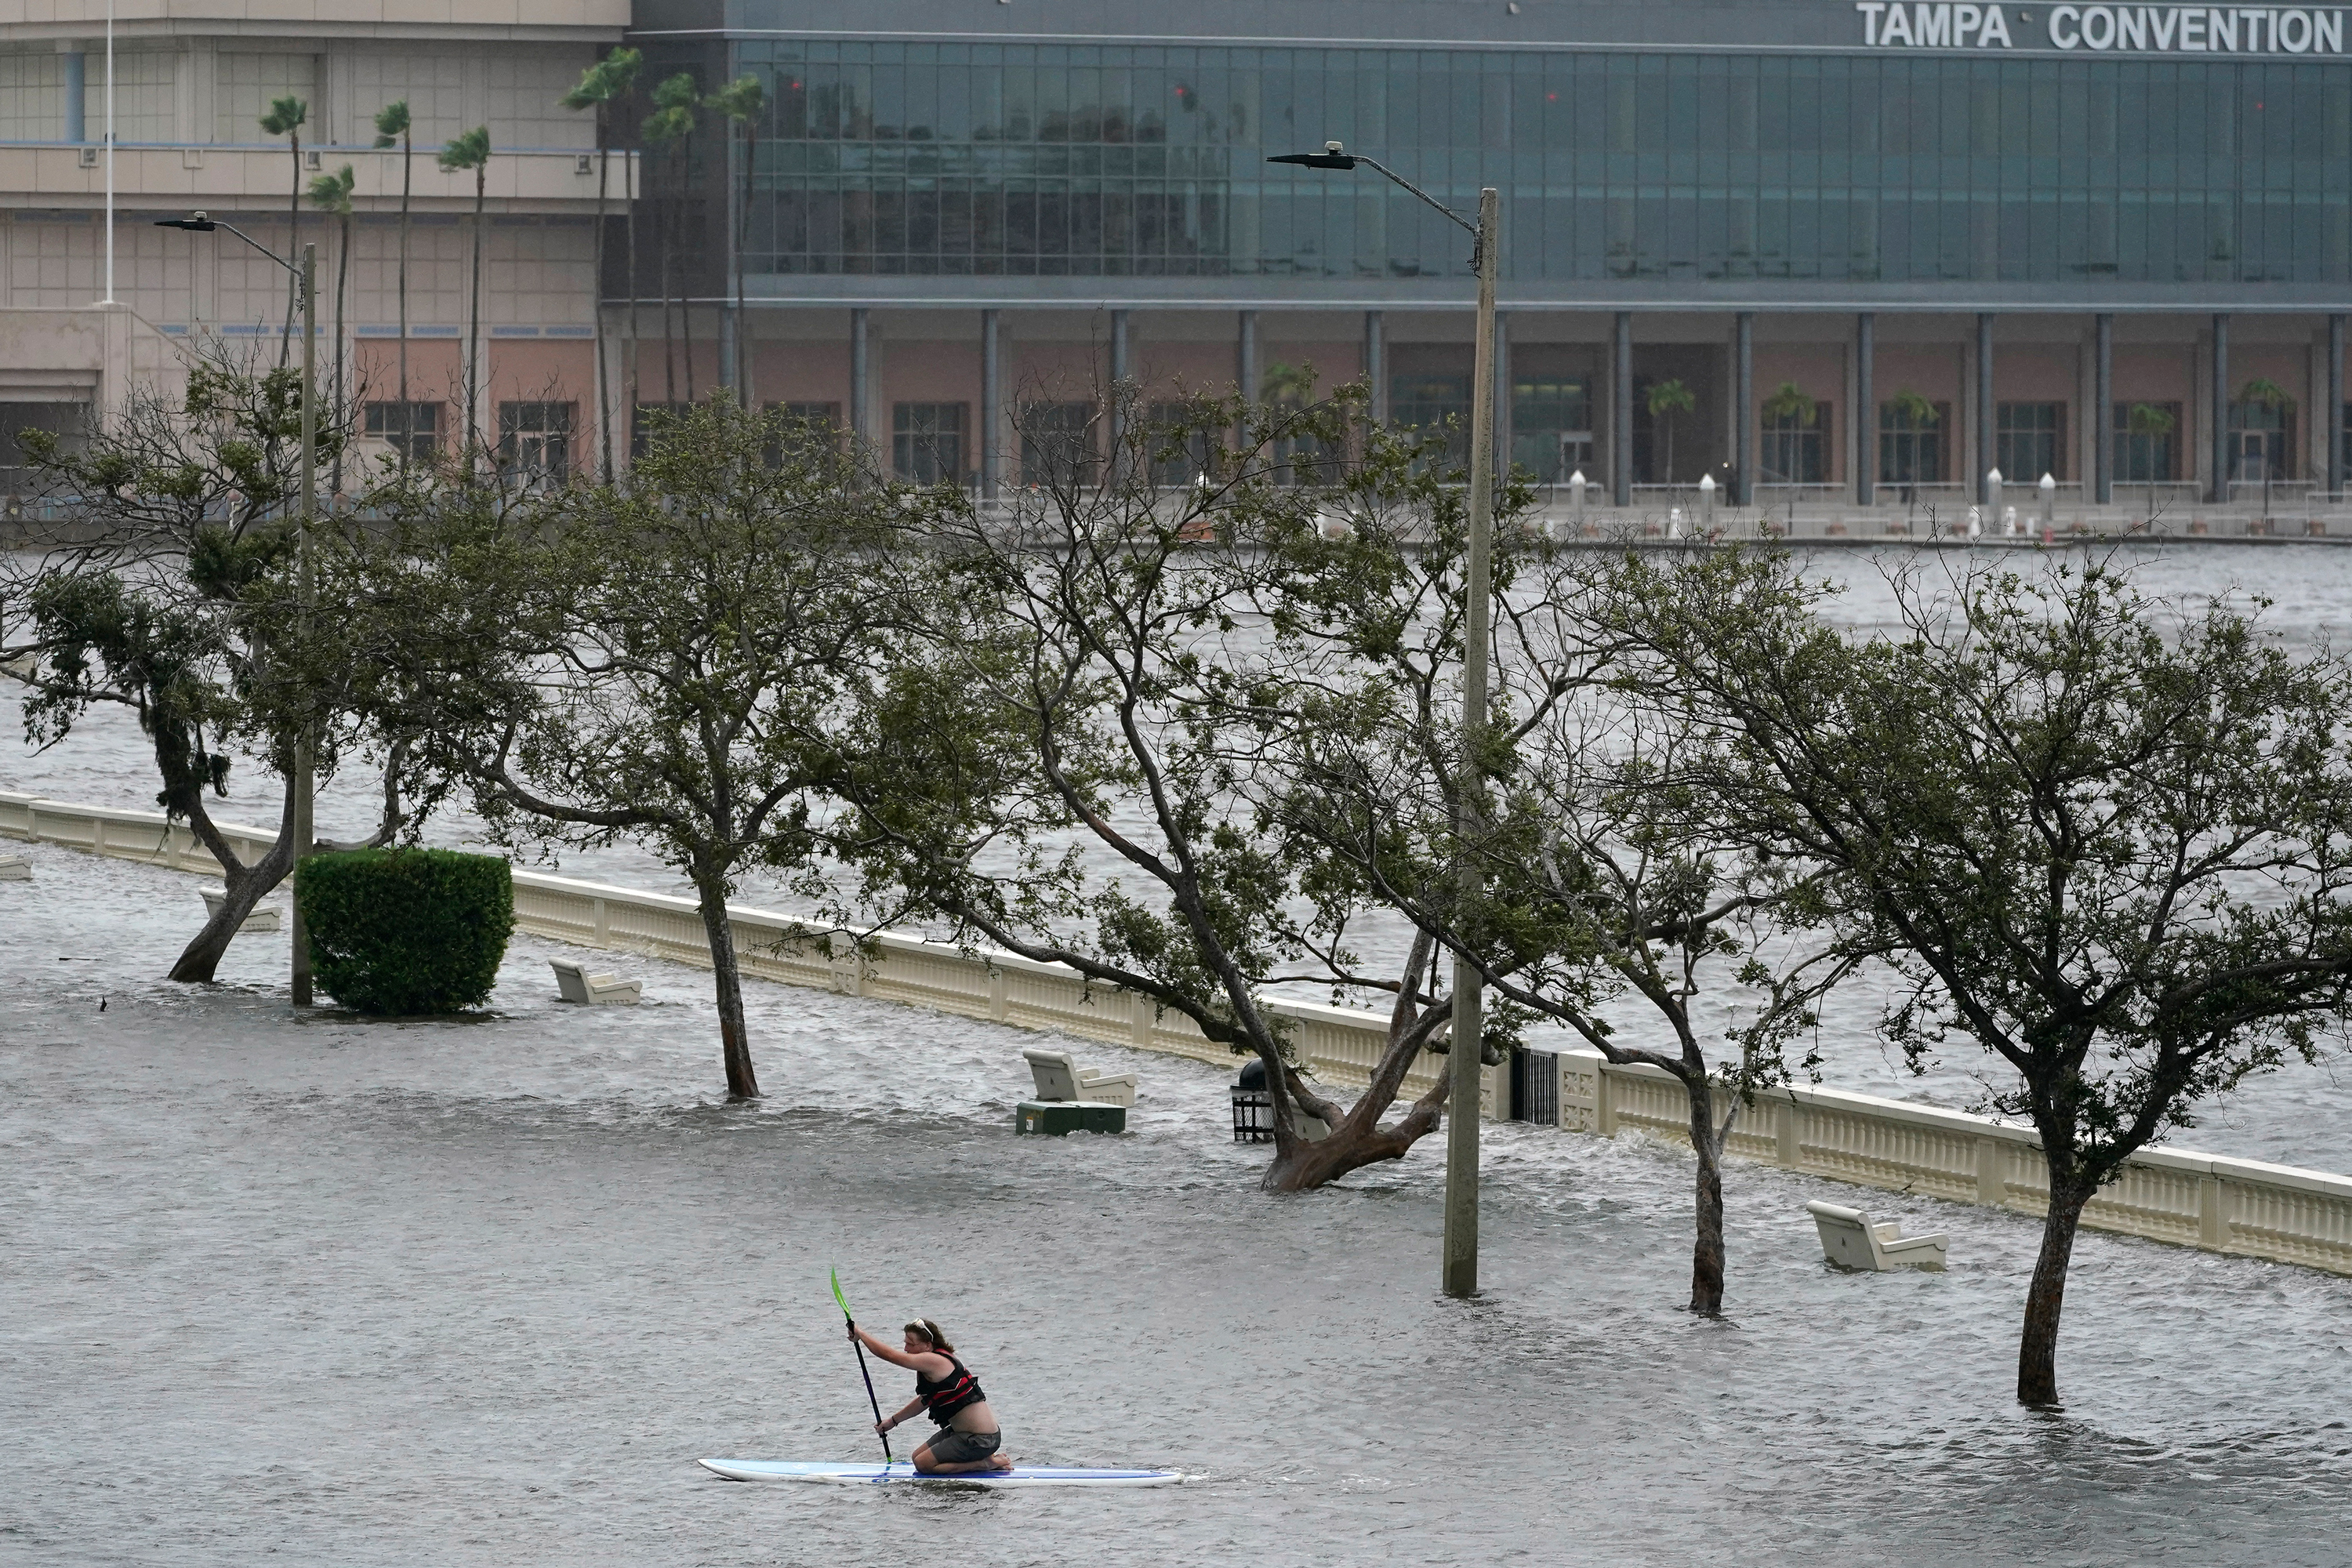 Zeke Pierce rides his paddle board down the middle of a flooded Bayshore Boulevard in Tampa, Florida on August 30.